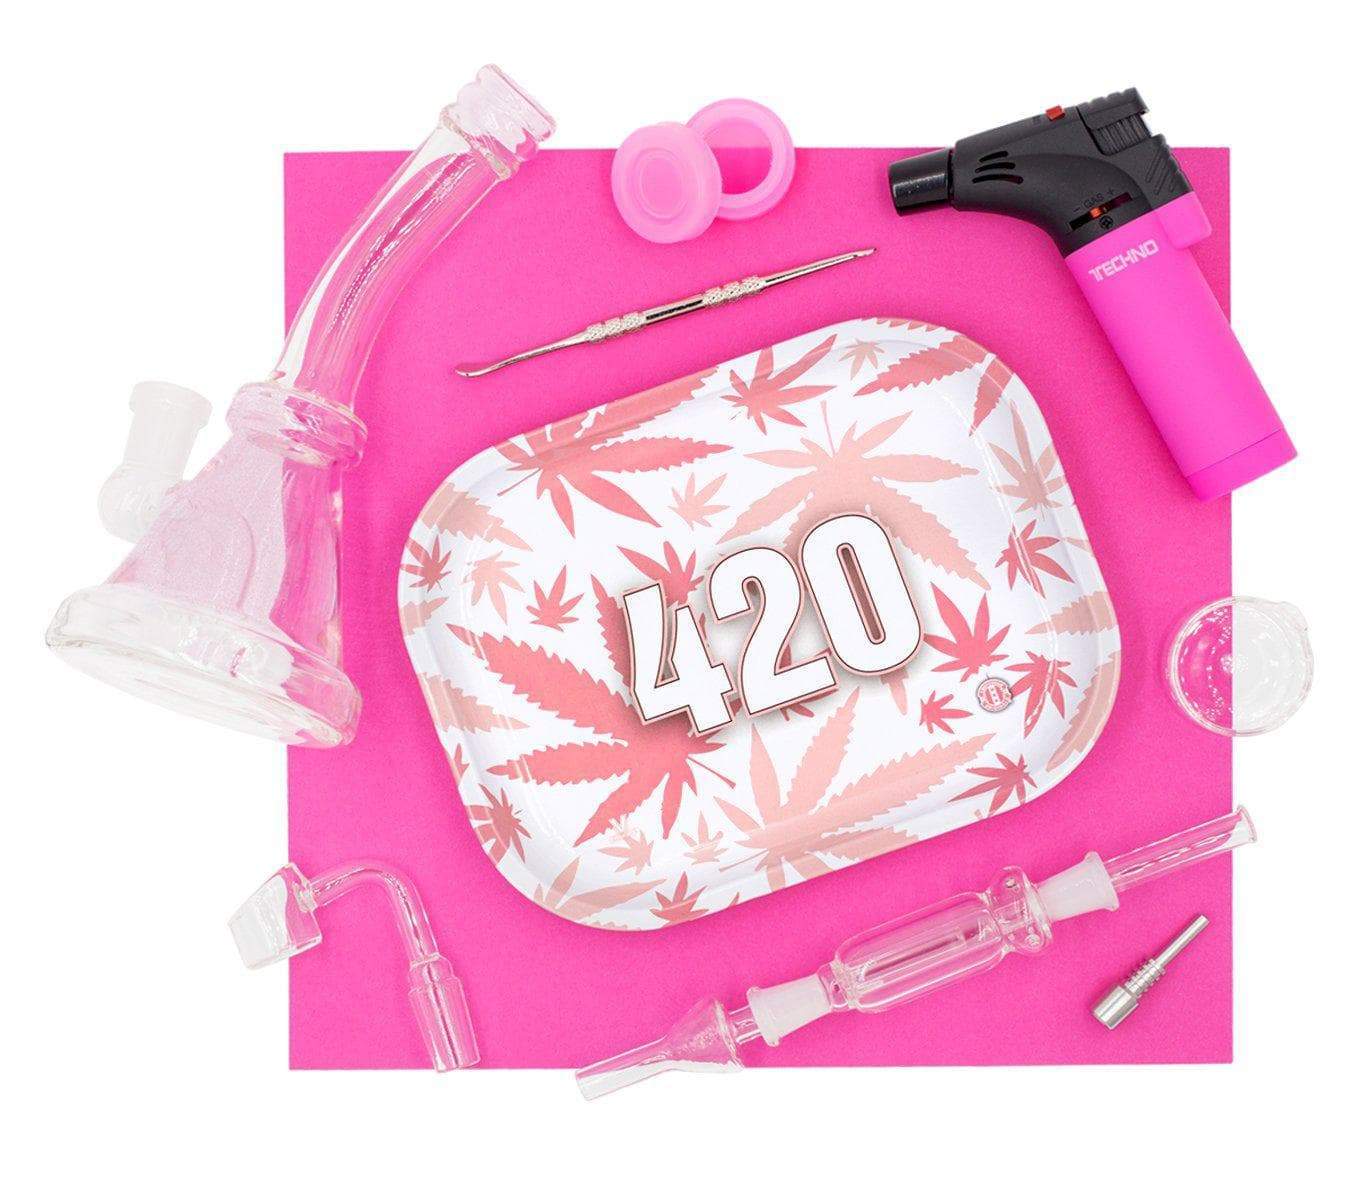 Cute set of pink dab rig, herb bowl, banger, torch, dab tool, 420 container, tray and nectar collector